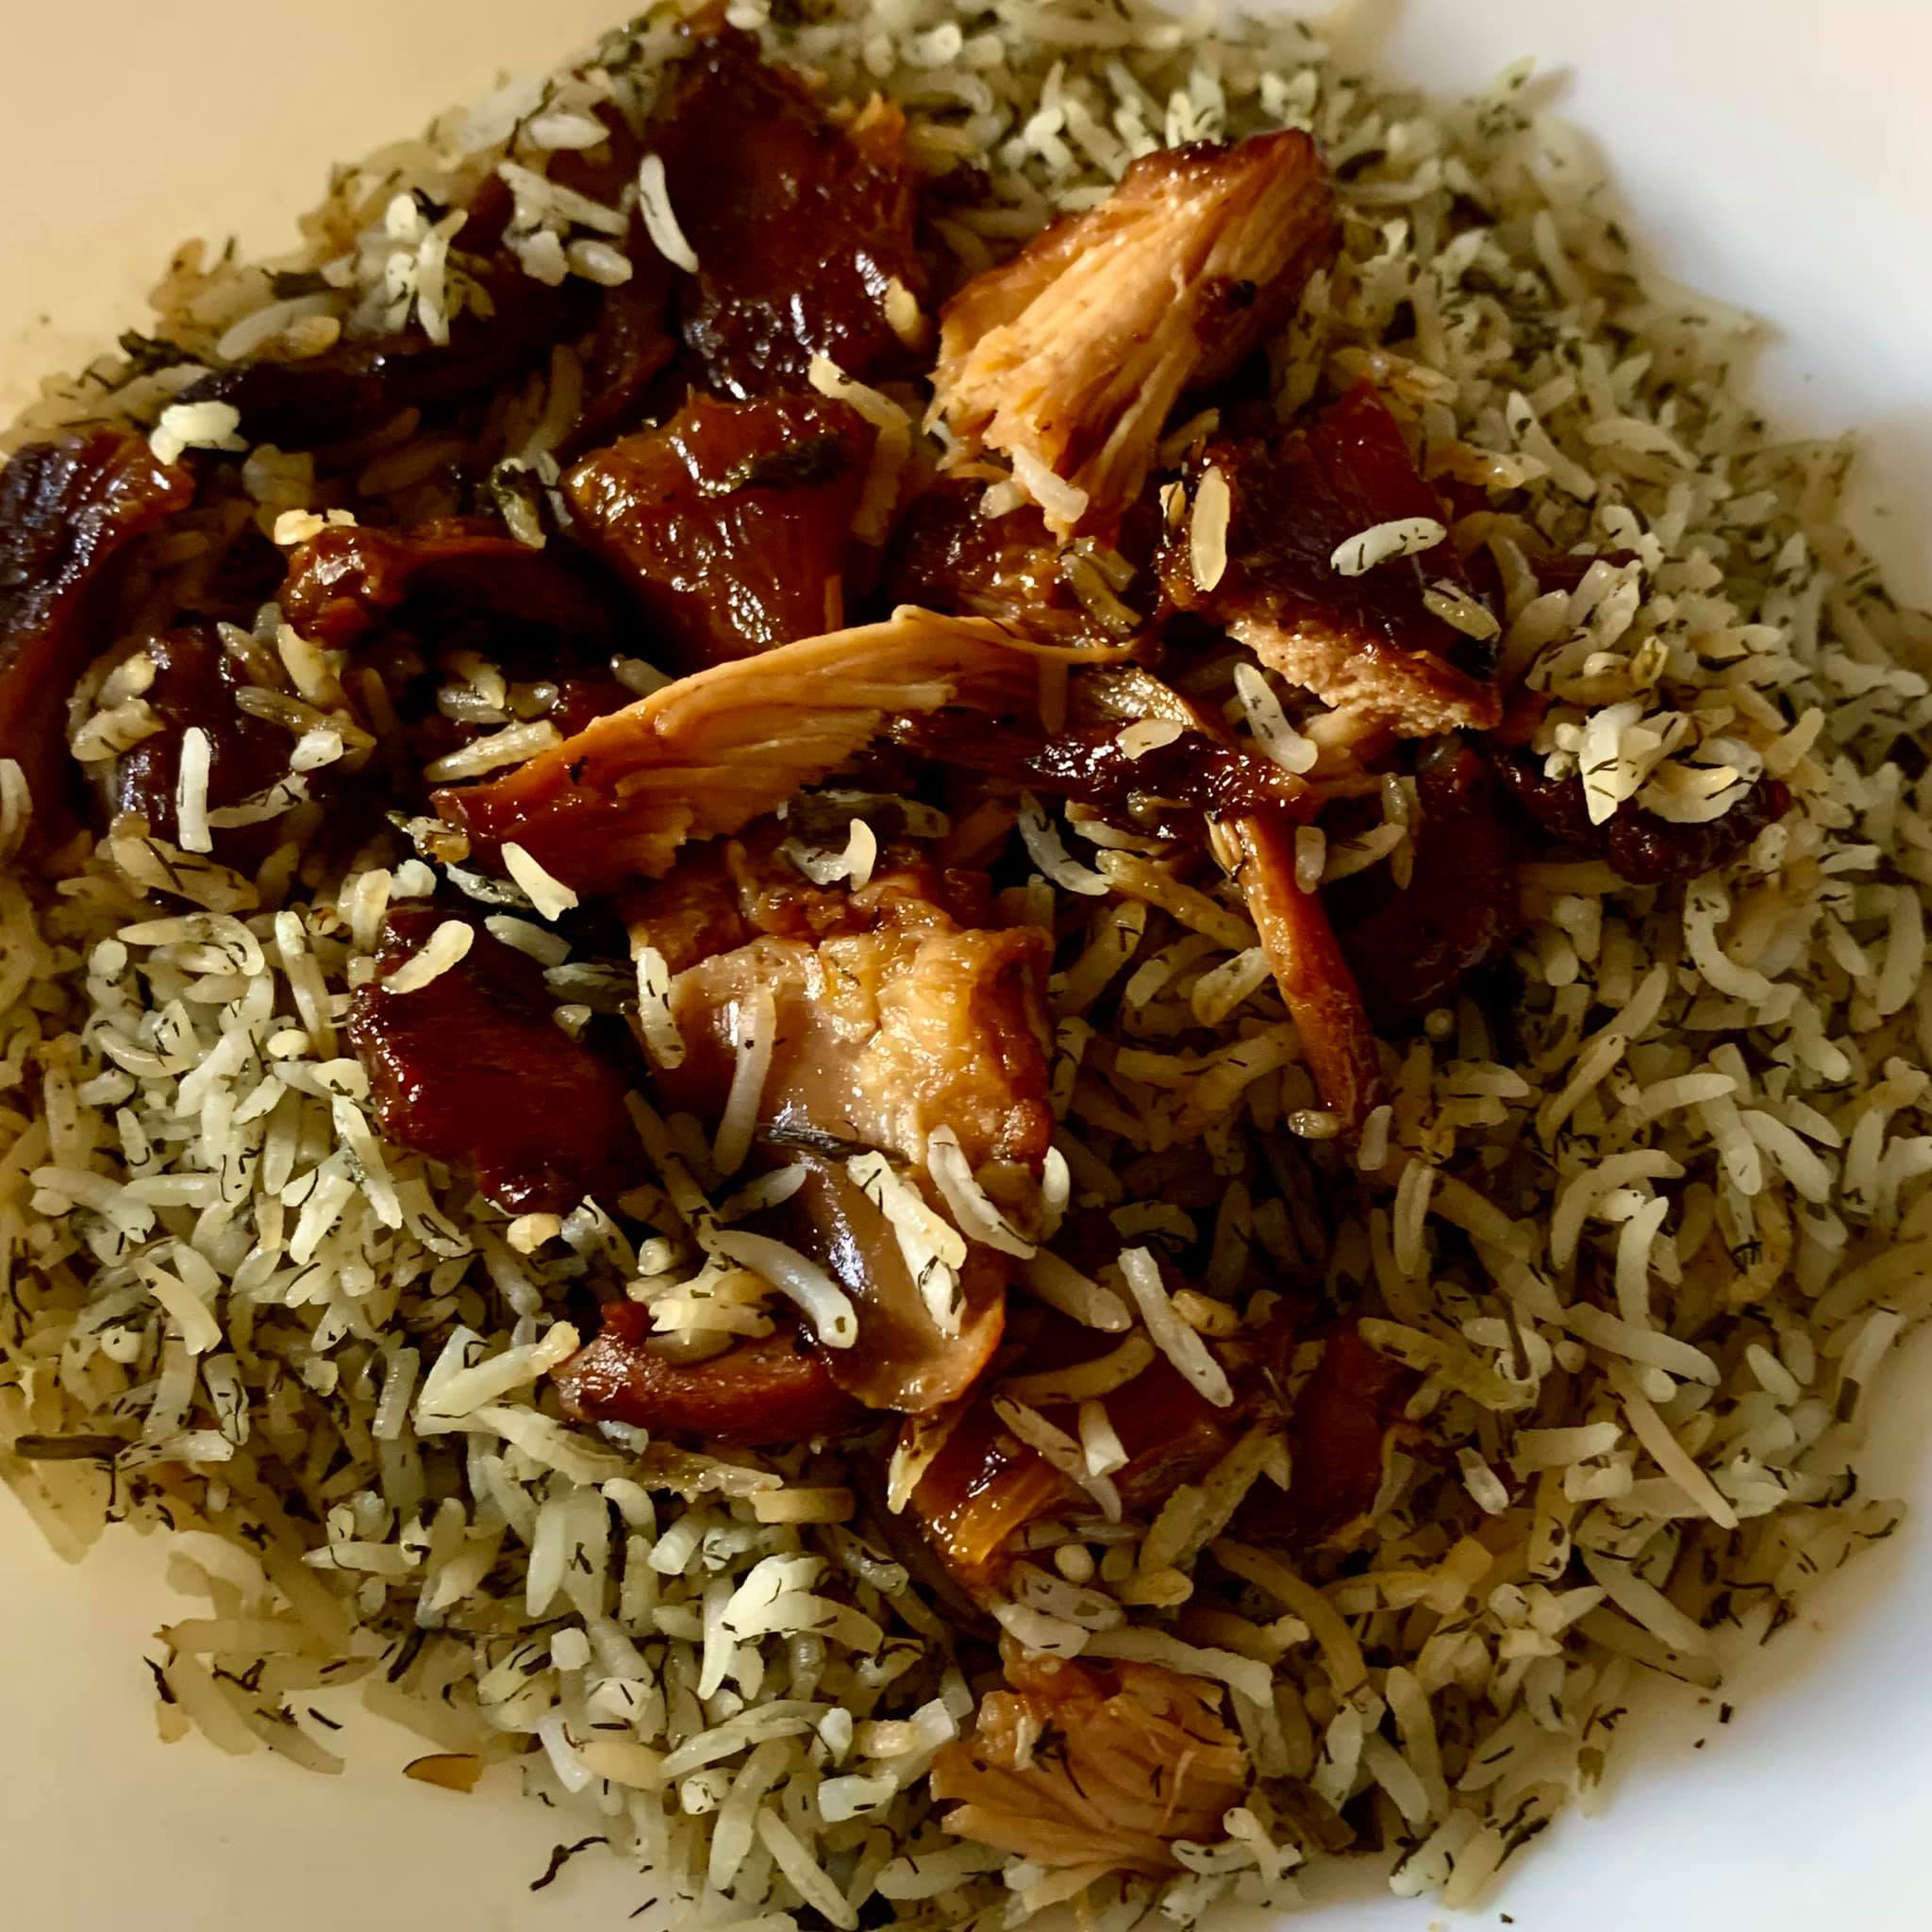 My new invented dish: Sabzi-polo (Persian herb-rice) with teriyaki chicken, put together from leftovers!